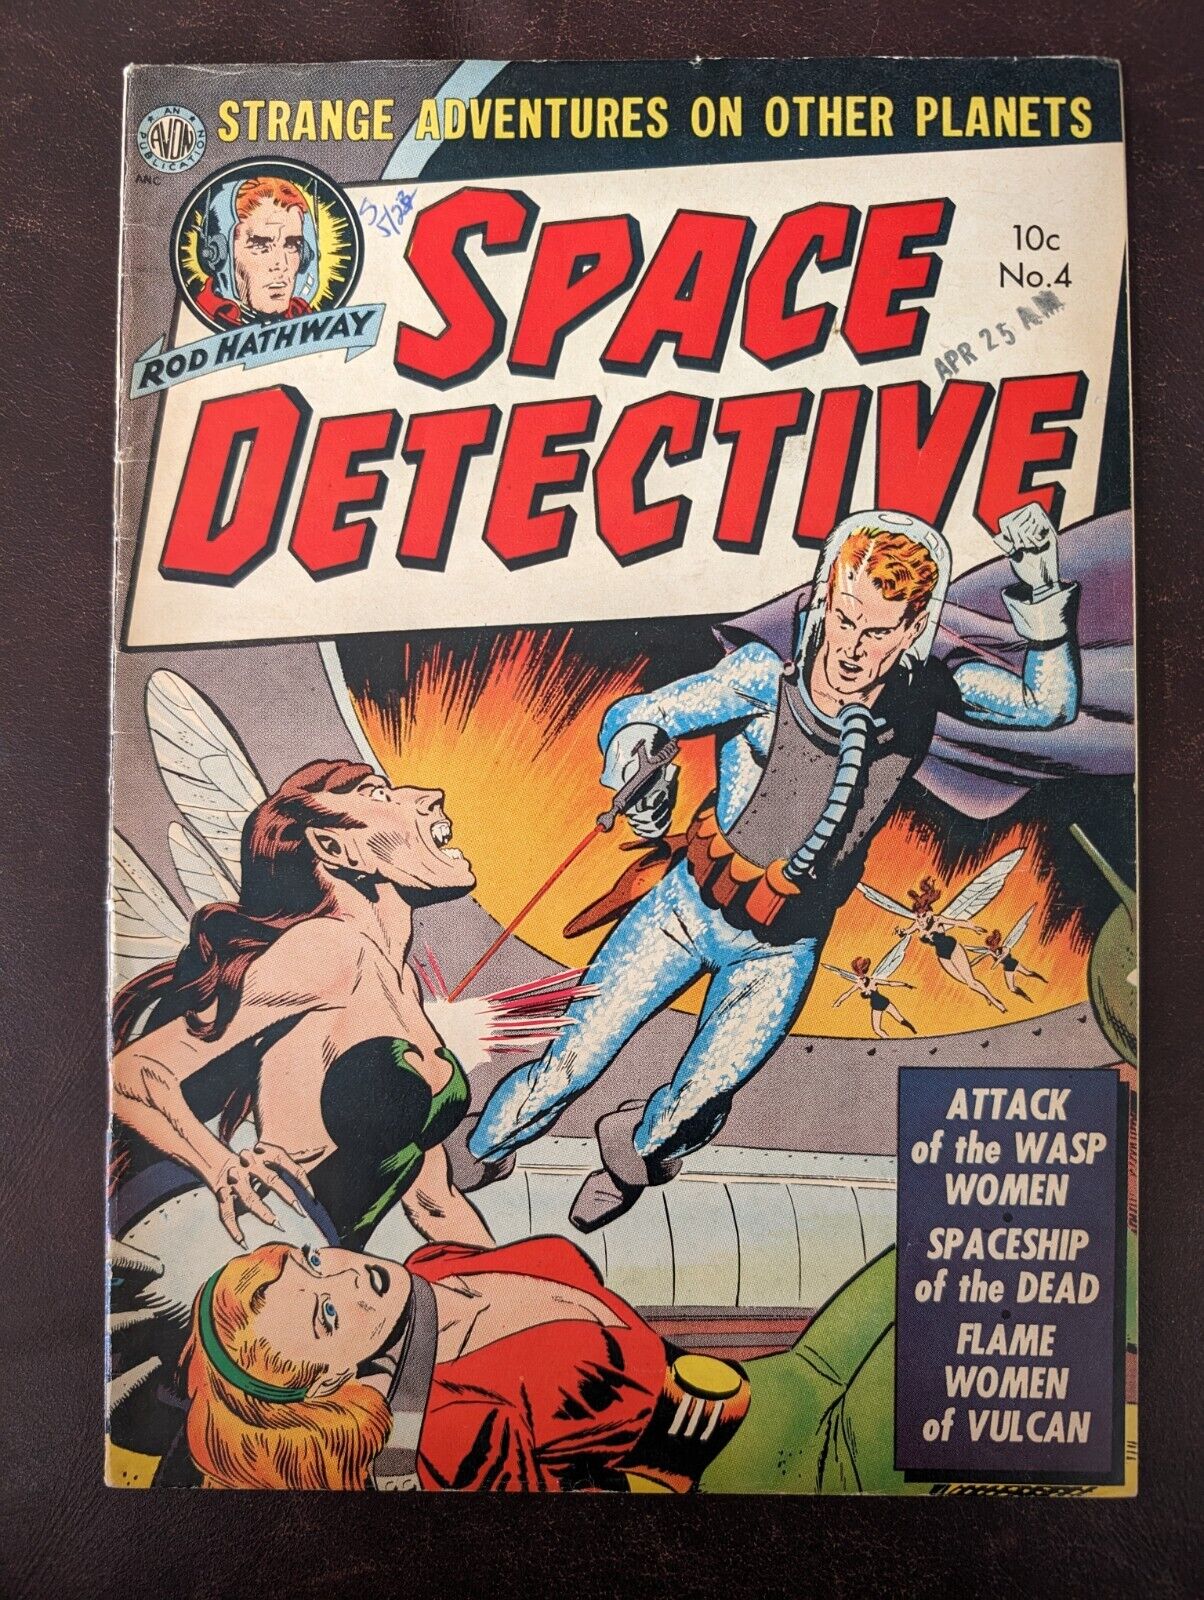 Space Detective #4 - VG/FN OWP - Precode SciFi - Wasp Woman - Avon 1952